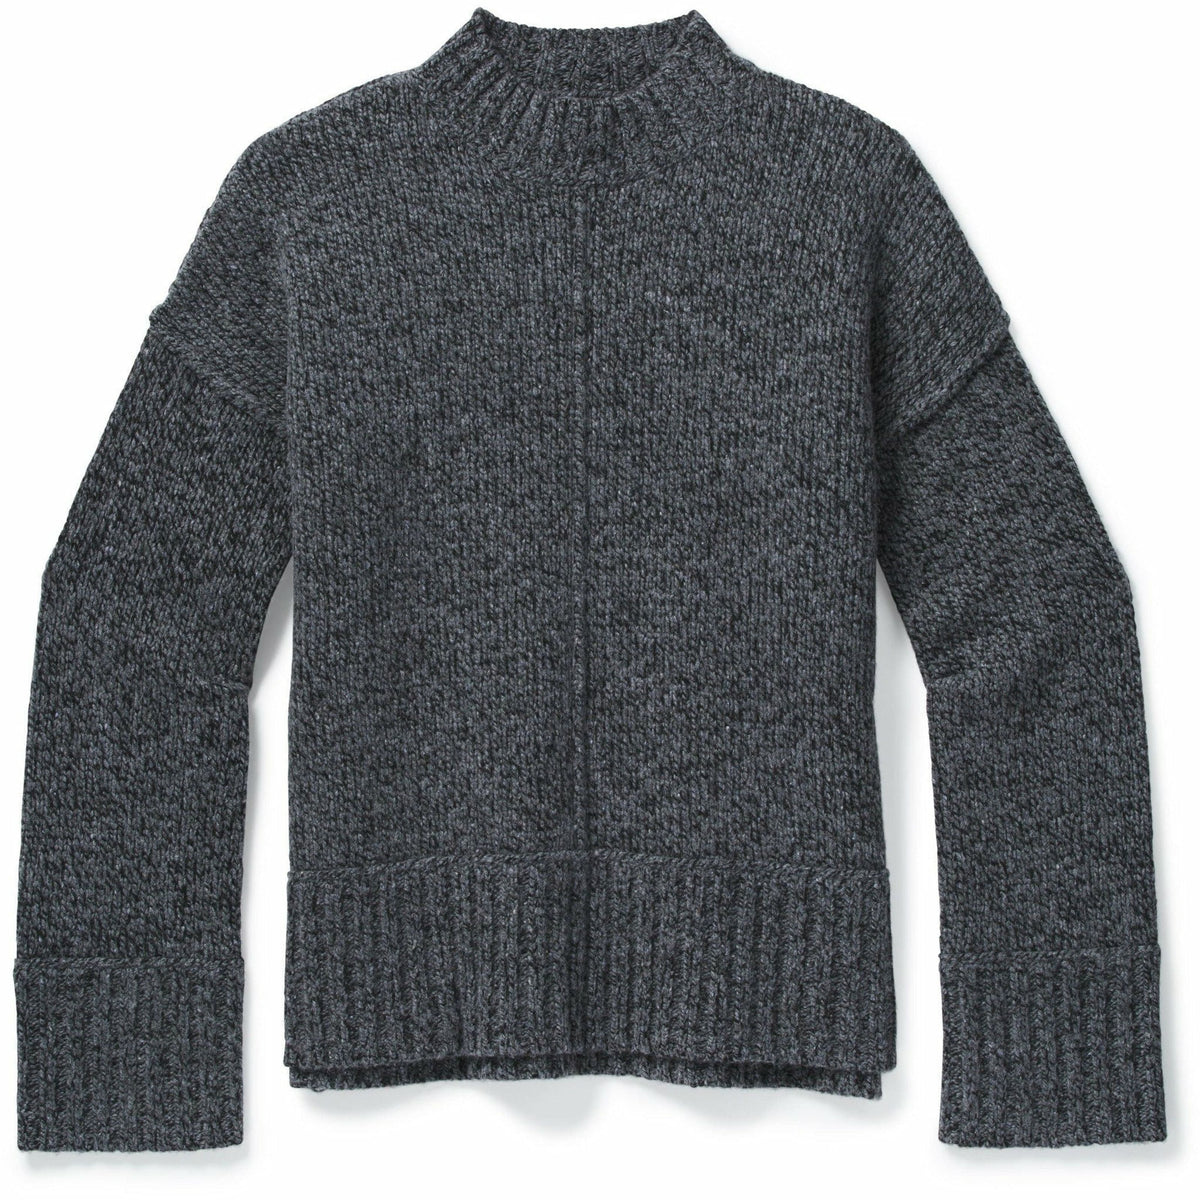 Smartwool Womens Bell Meadow Sweater - GoBros.com